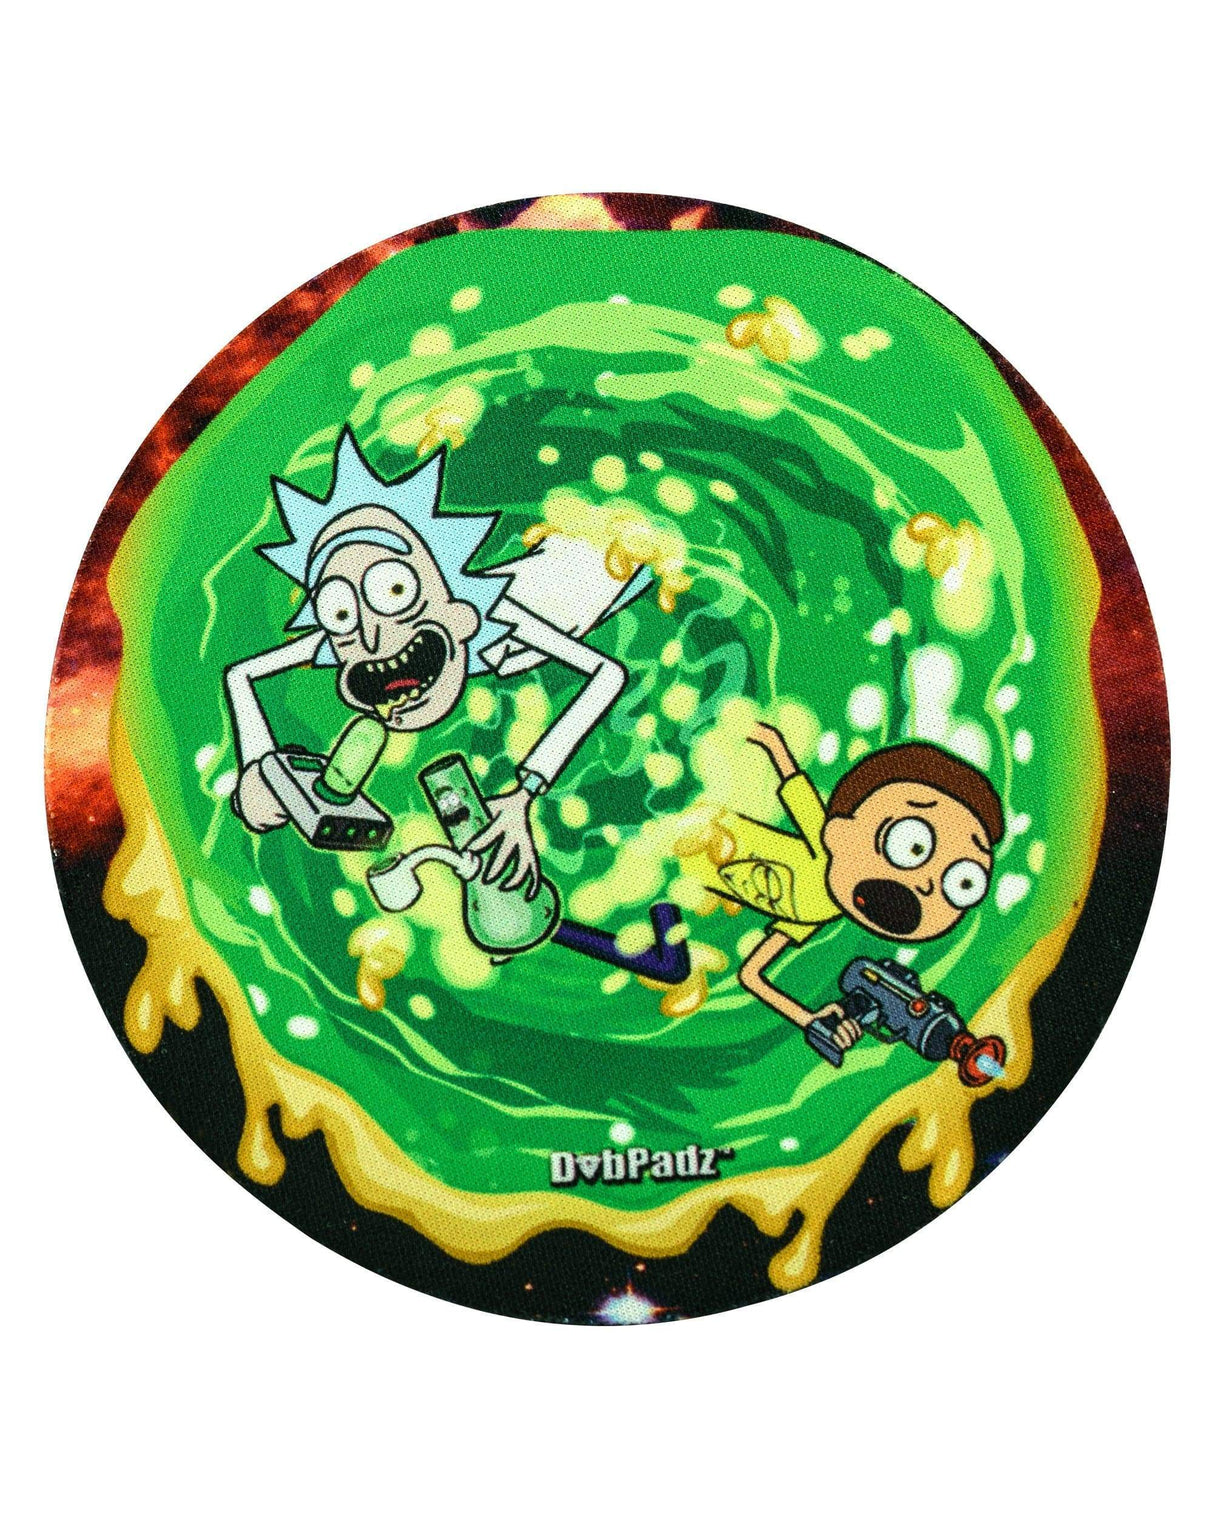 DabPadz 5" Rubber Dropmat featuring Rick and Morty design, ideal for dab rig setup